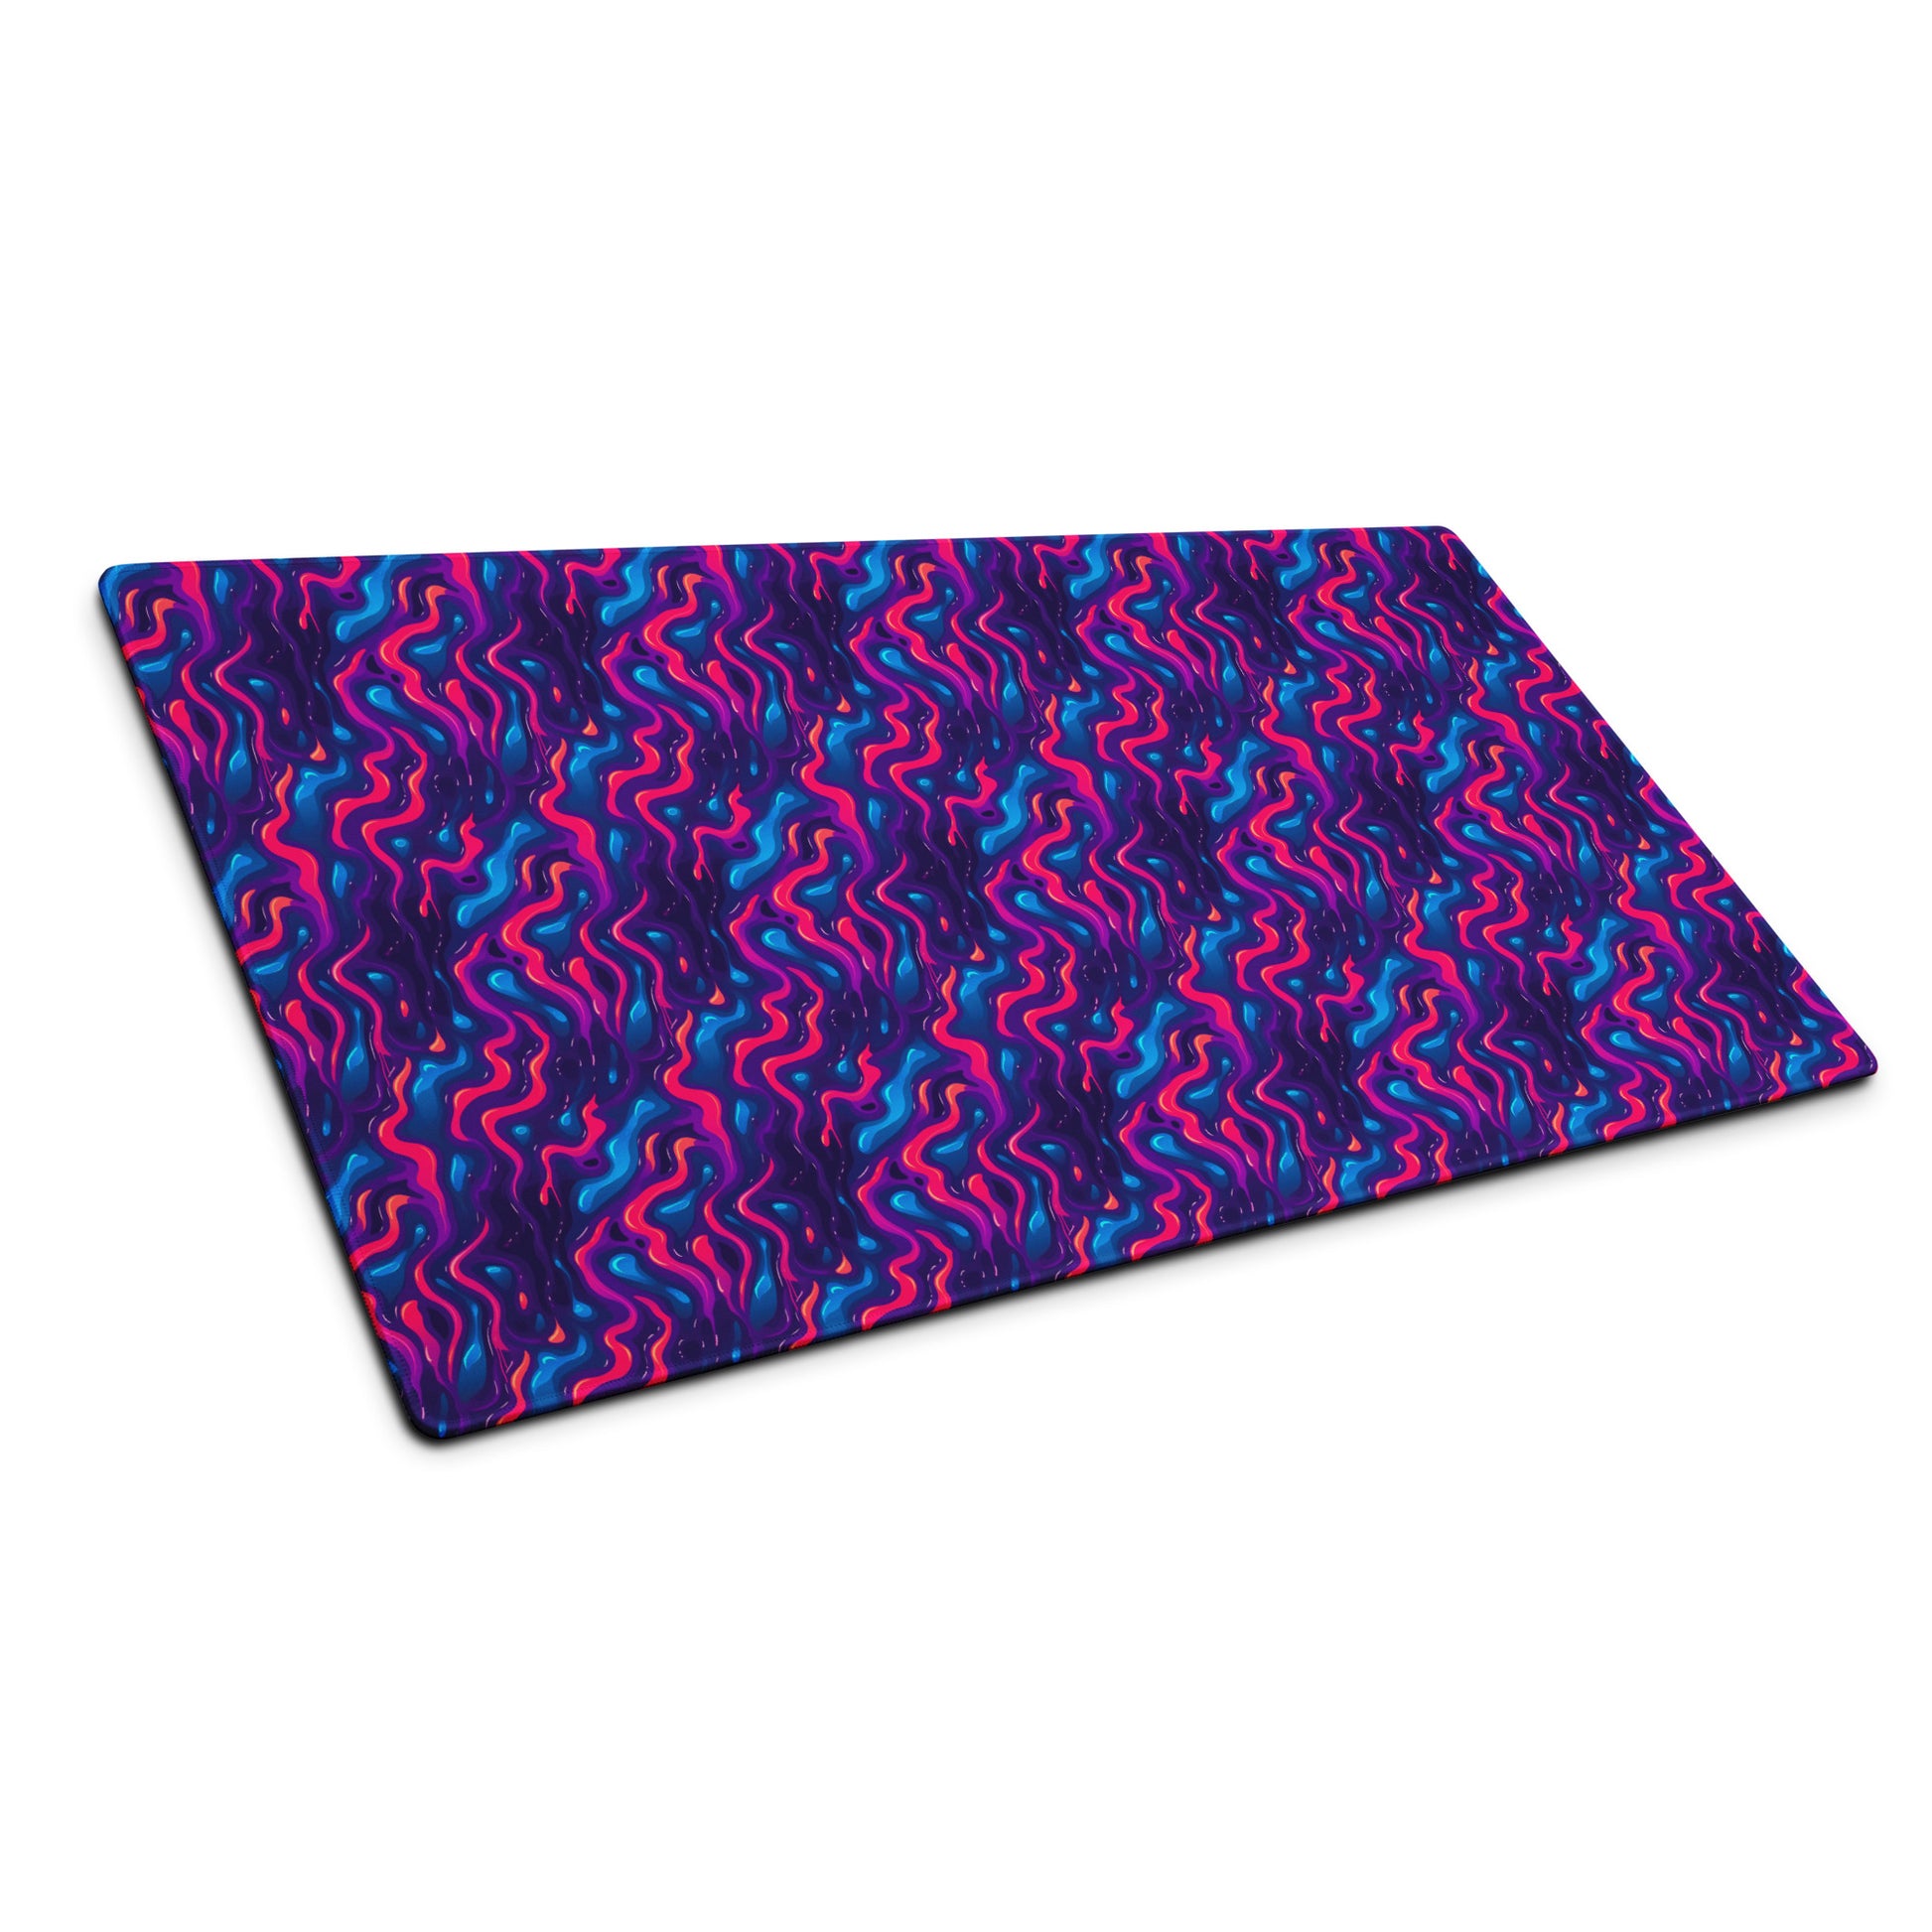 A 36" x 18" desk pad with a pink, blue and purple wavy pattern sitting at an angle.